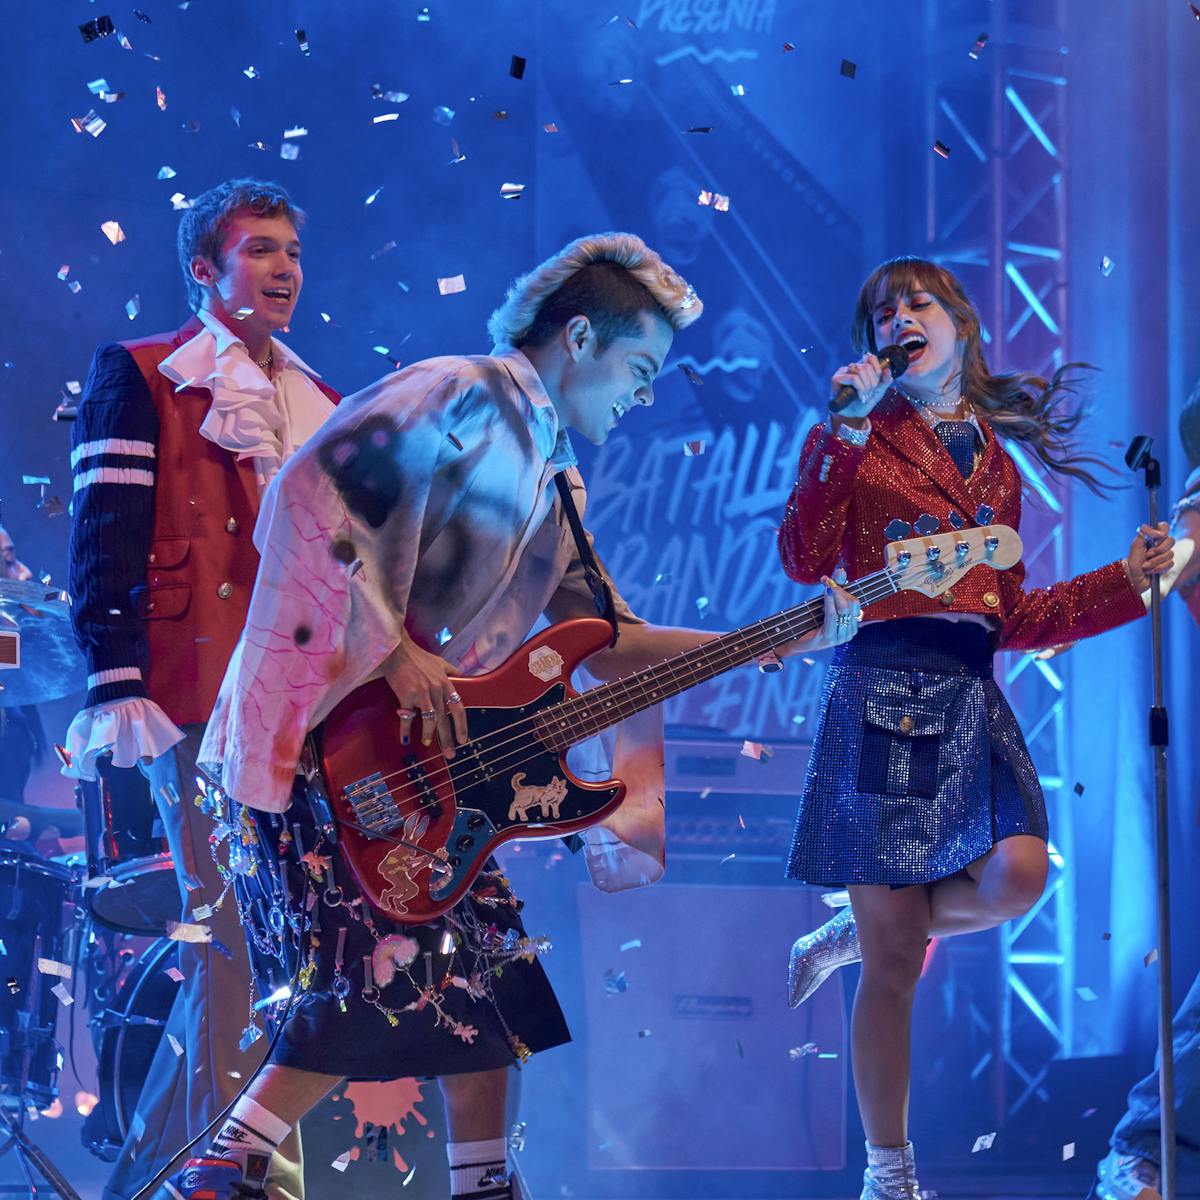 The cast of Rebelde rock out on a confetti strewn stage.